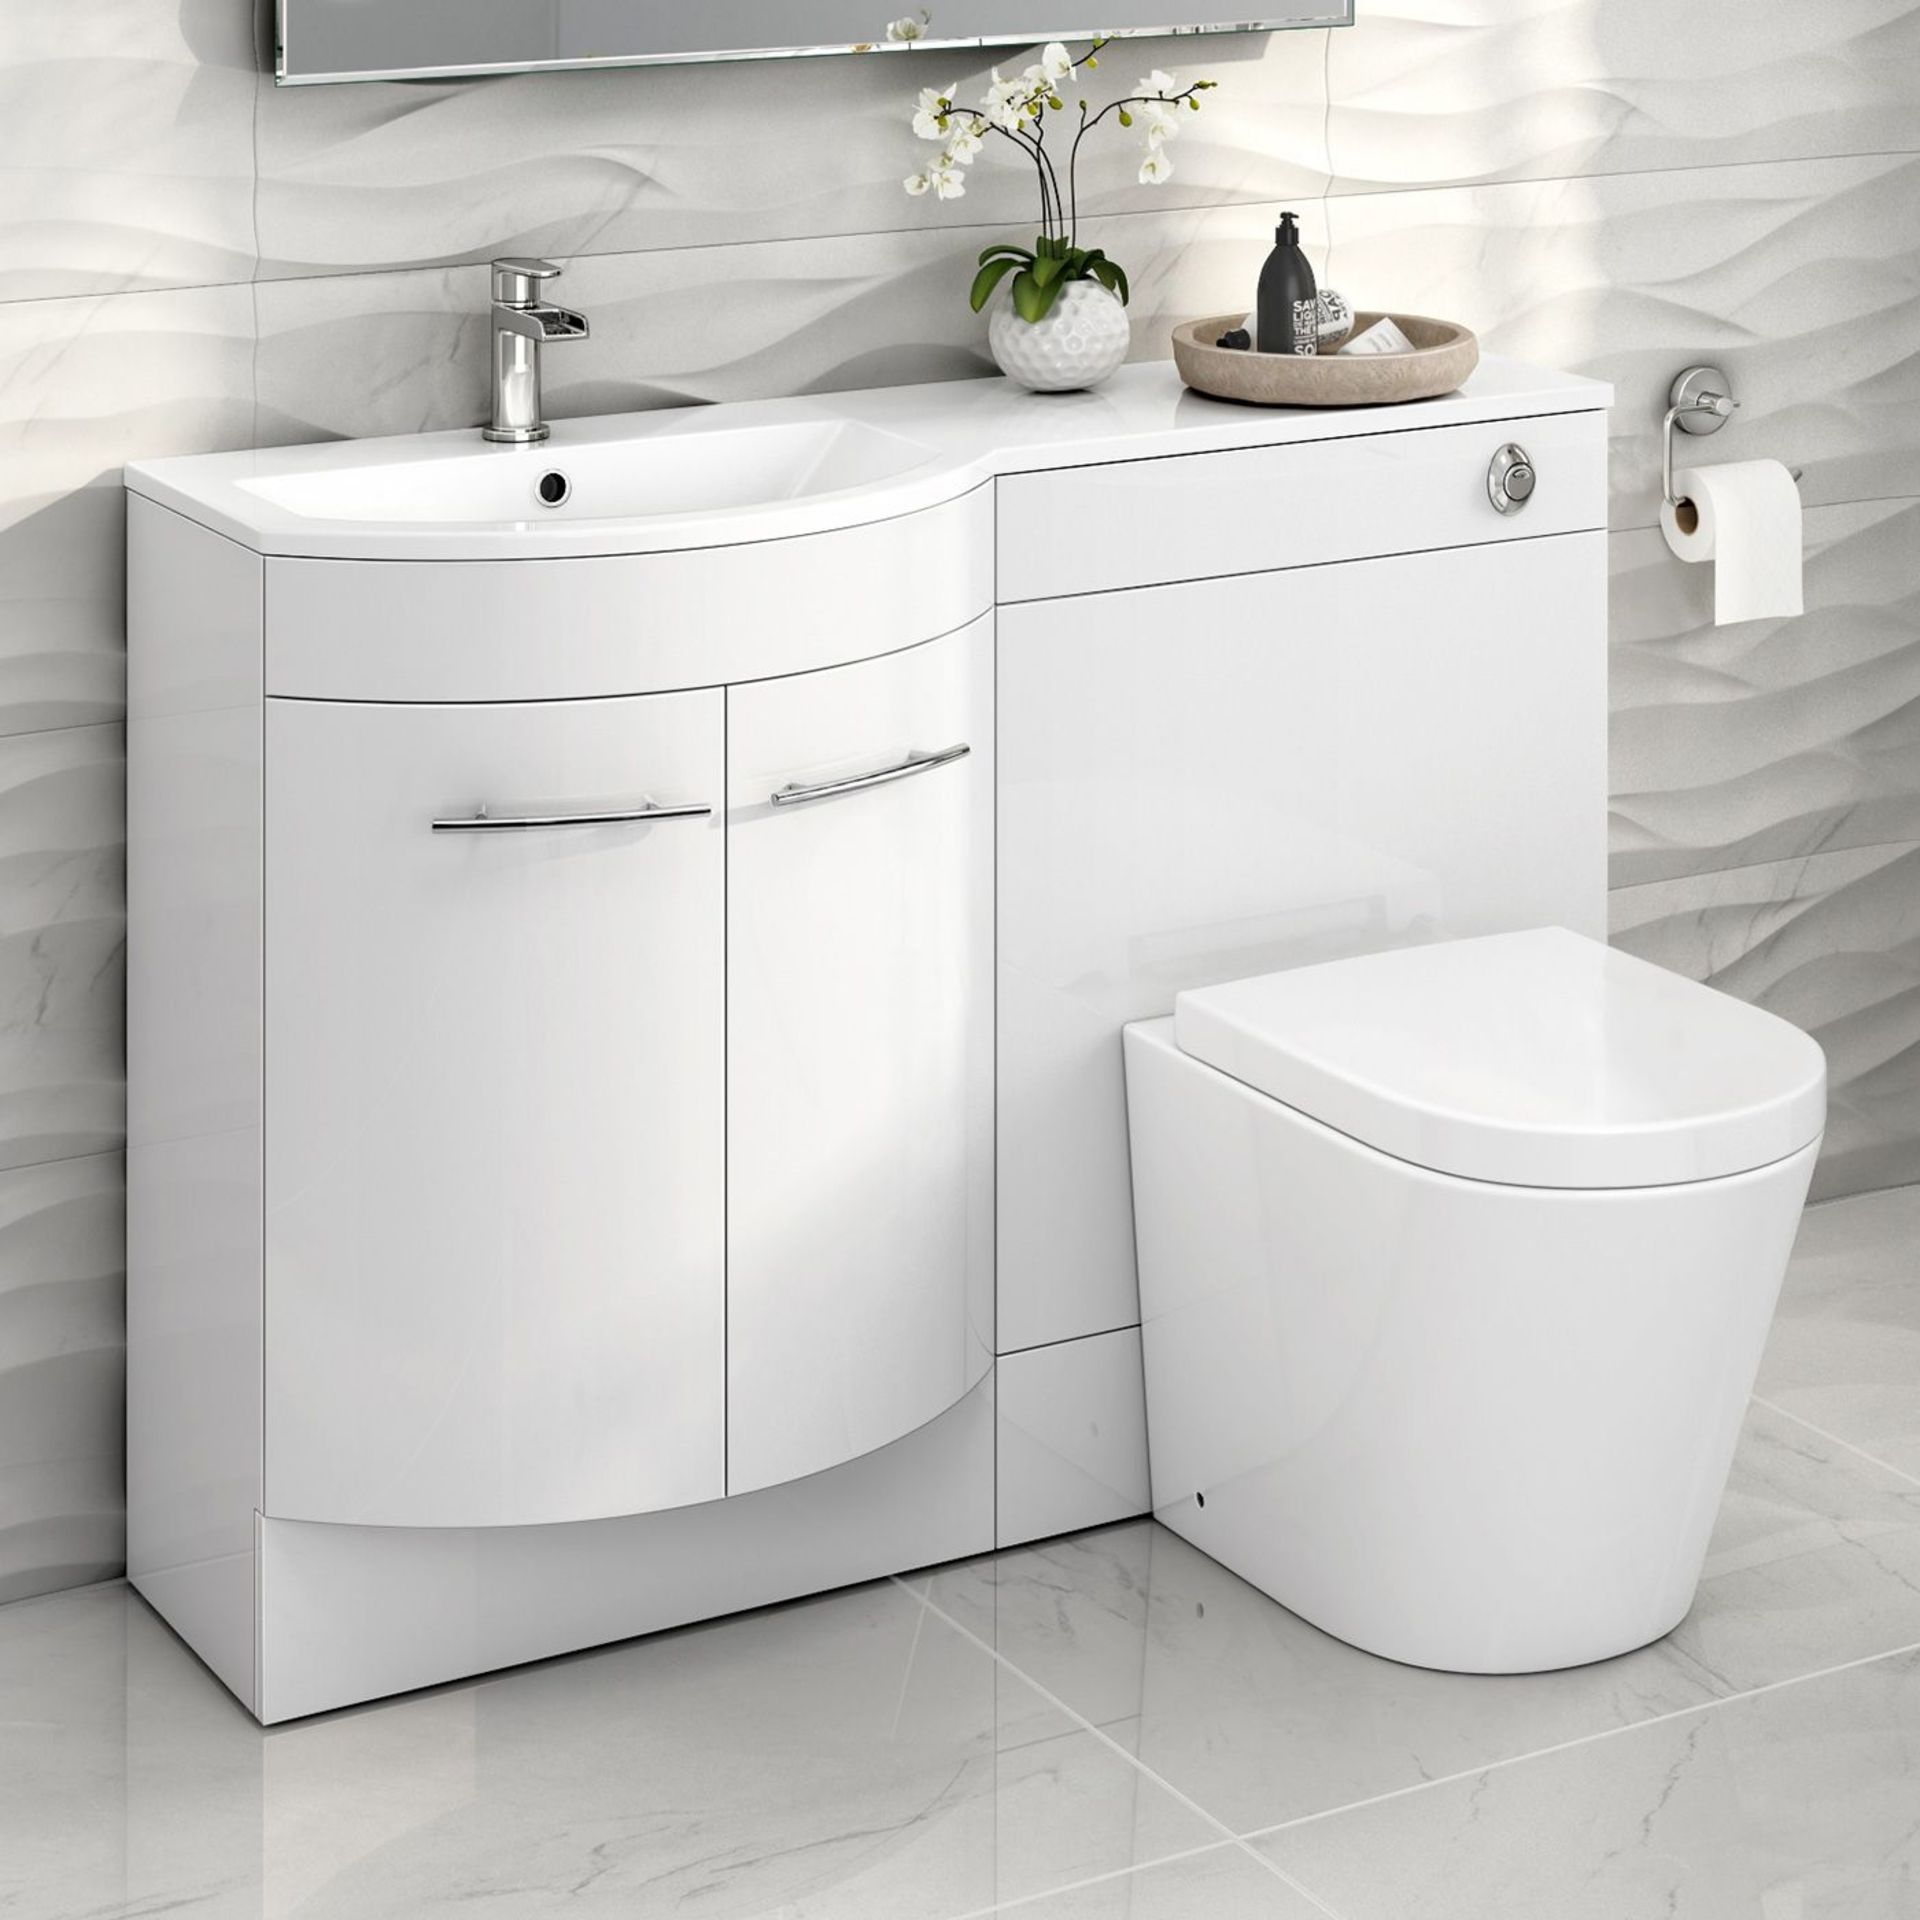 New Boxed 1200mm Alexis White Gloss Left Hand Vanity Unit Florence Pan. RRP £999.99.Contempora...